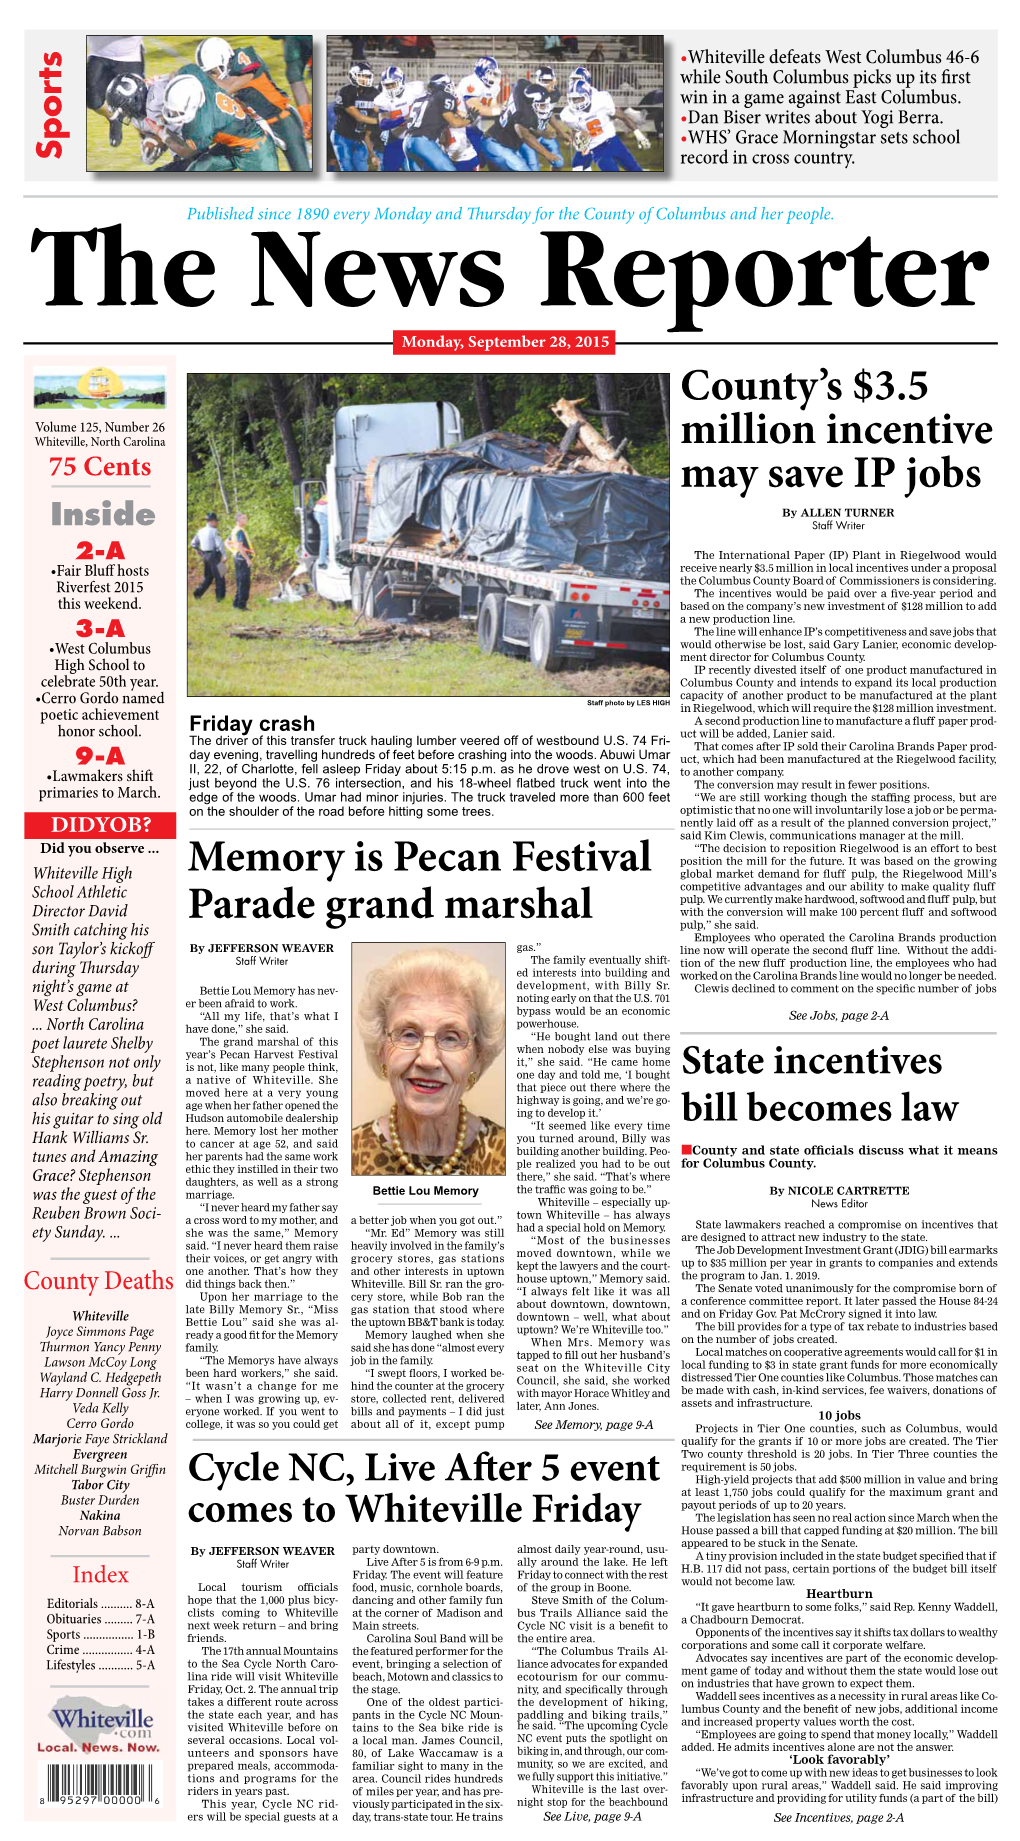 County's $3.5 Million Incentive May Save IP Jobs Memory Is Pecan Festival Parade Grand Marshal